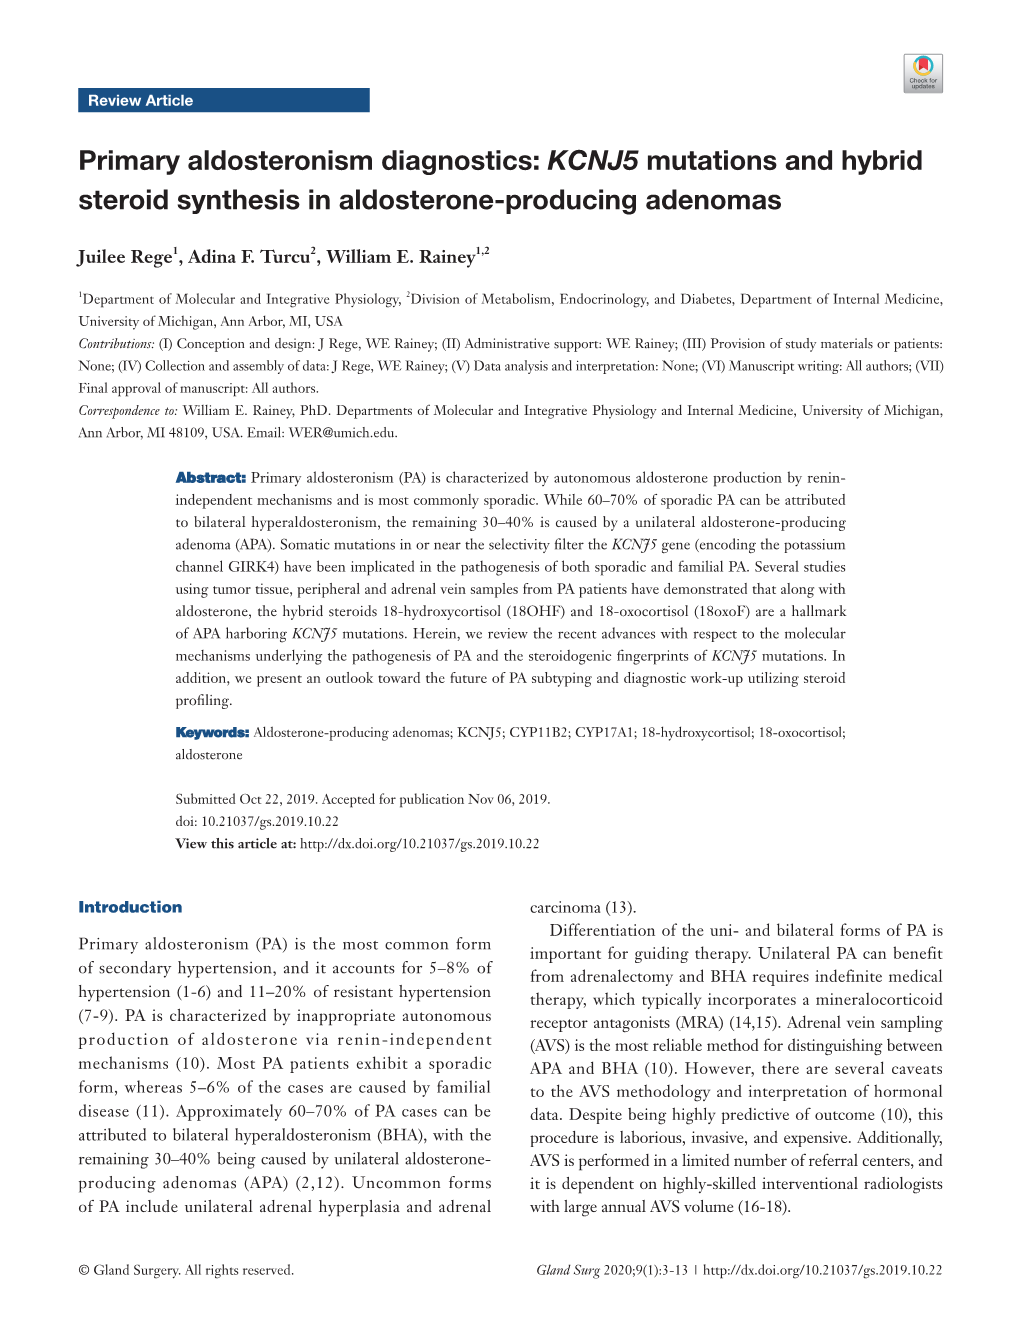 Primary Aldosteronism Diagnostics: KCNJ5 Mutations and Hybrid Steroid Synthesis in Aldosterone-Producing Adenomas